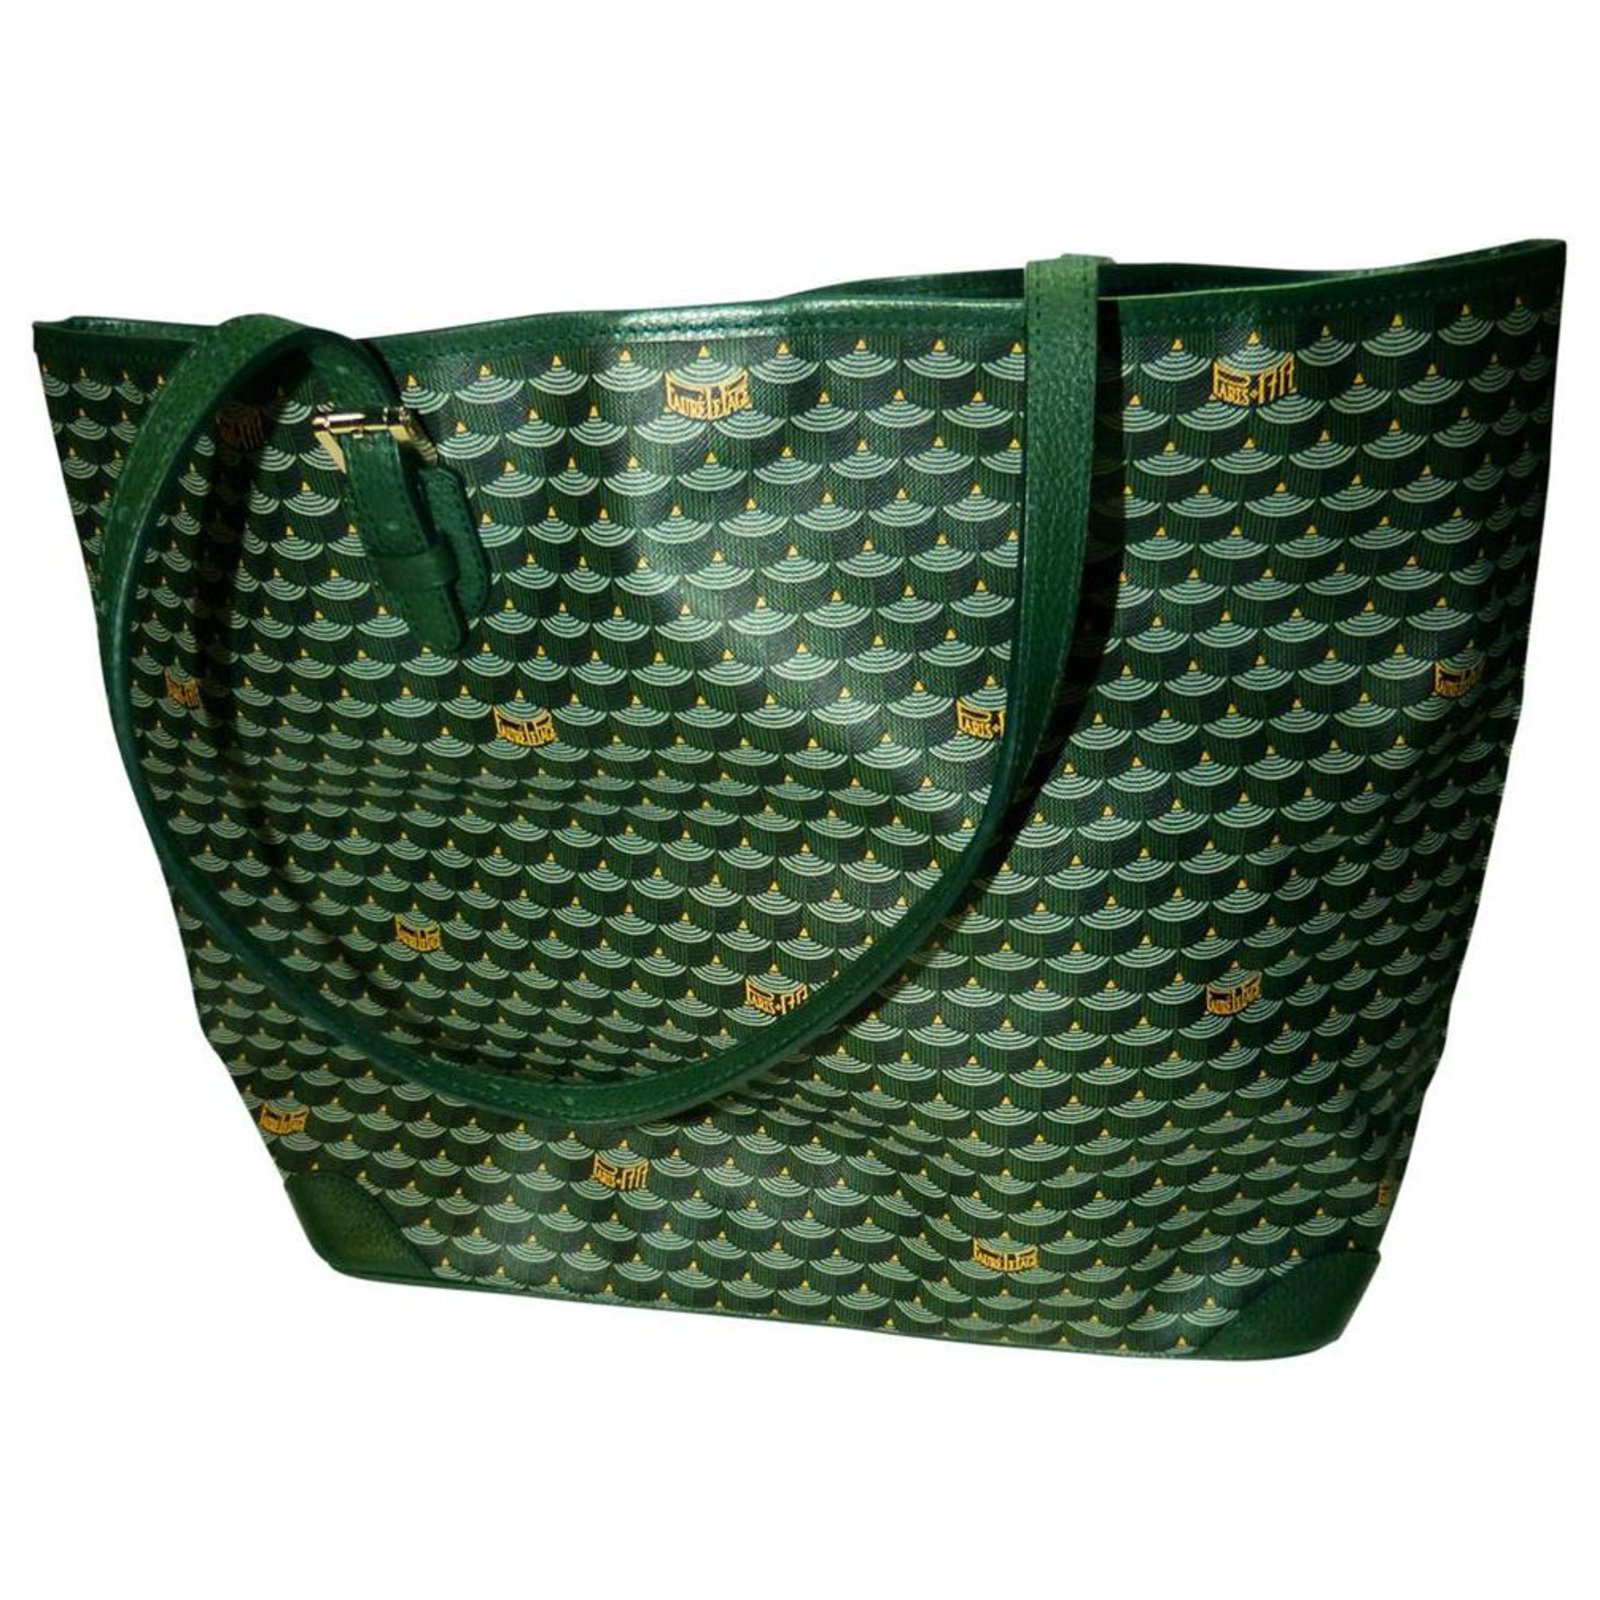 Faure Le Page Green Coated Canvas and Leather Daily Battle 37 Tote